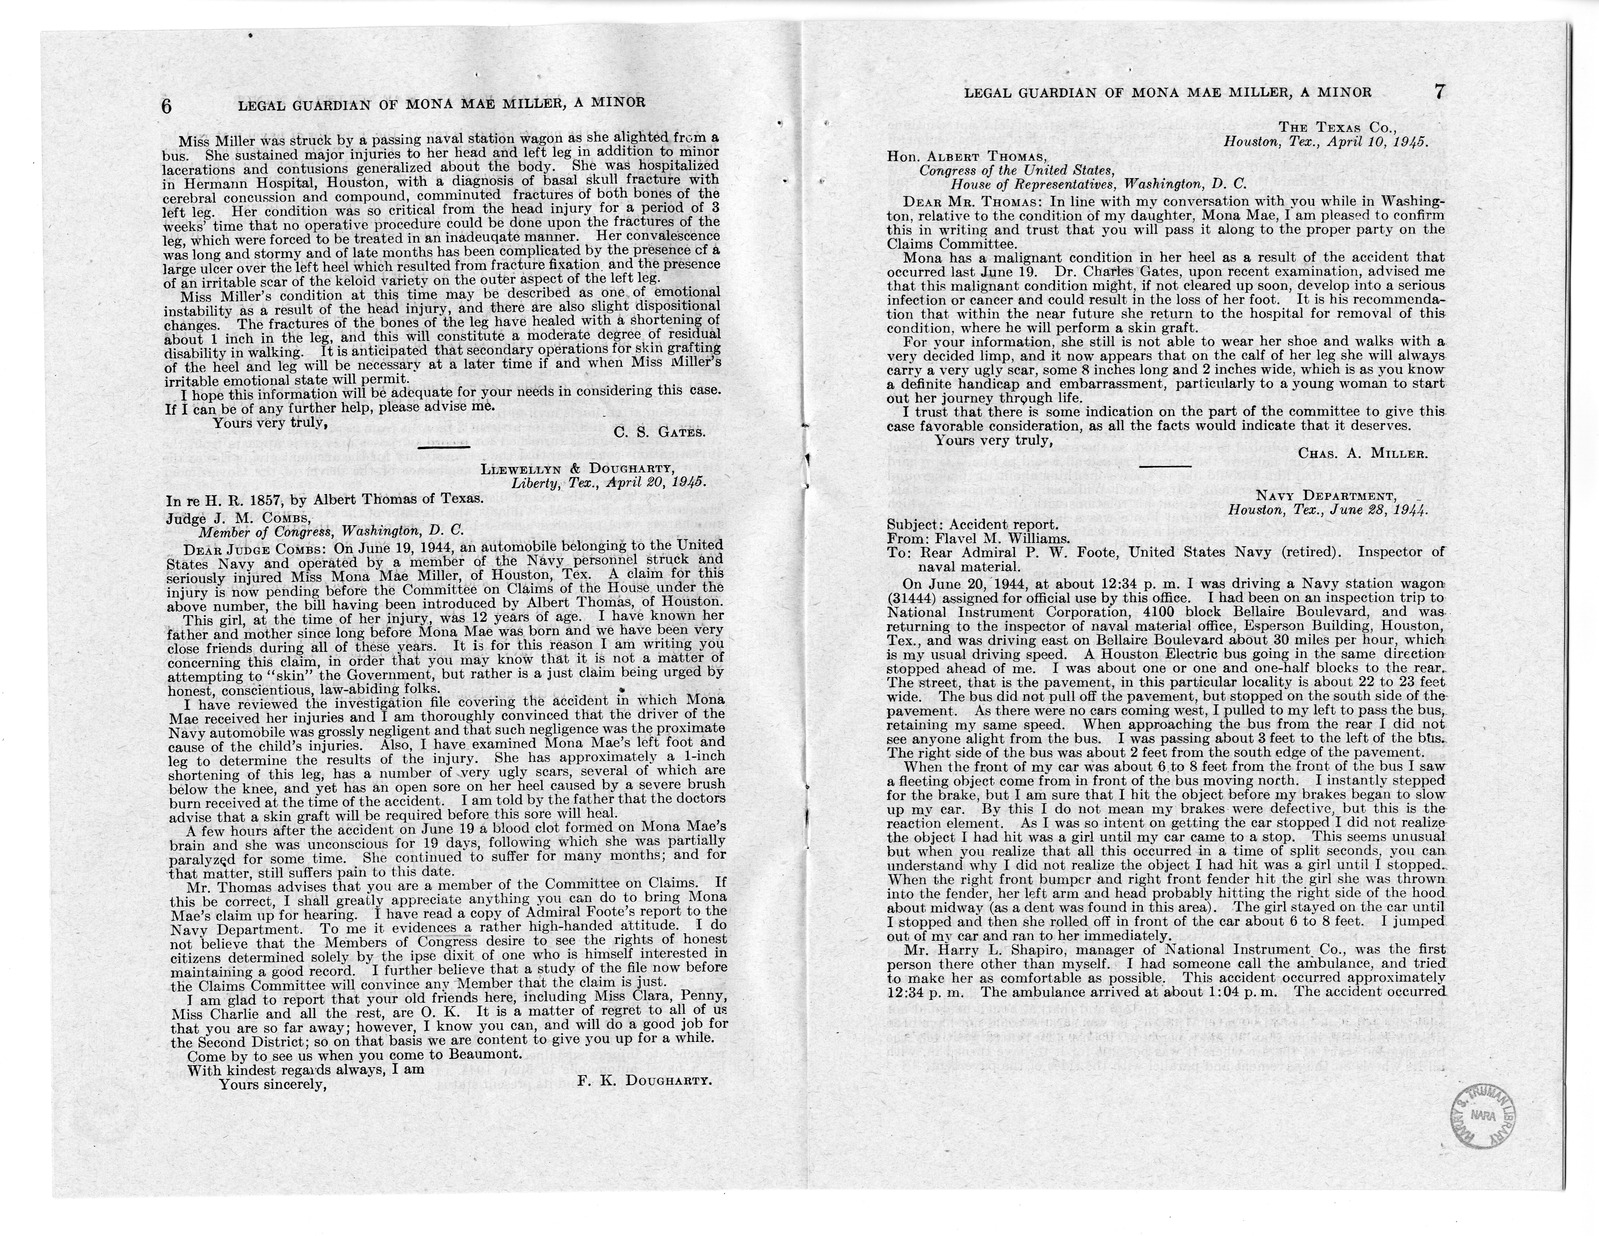 Memorandum from Harold D. Smith to M. C. Latta, H.R. 1857, For the Relief of the Legal Guardian of Mona Mae Miller, a Minor, with Attachments